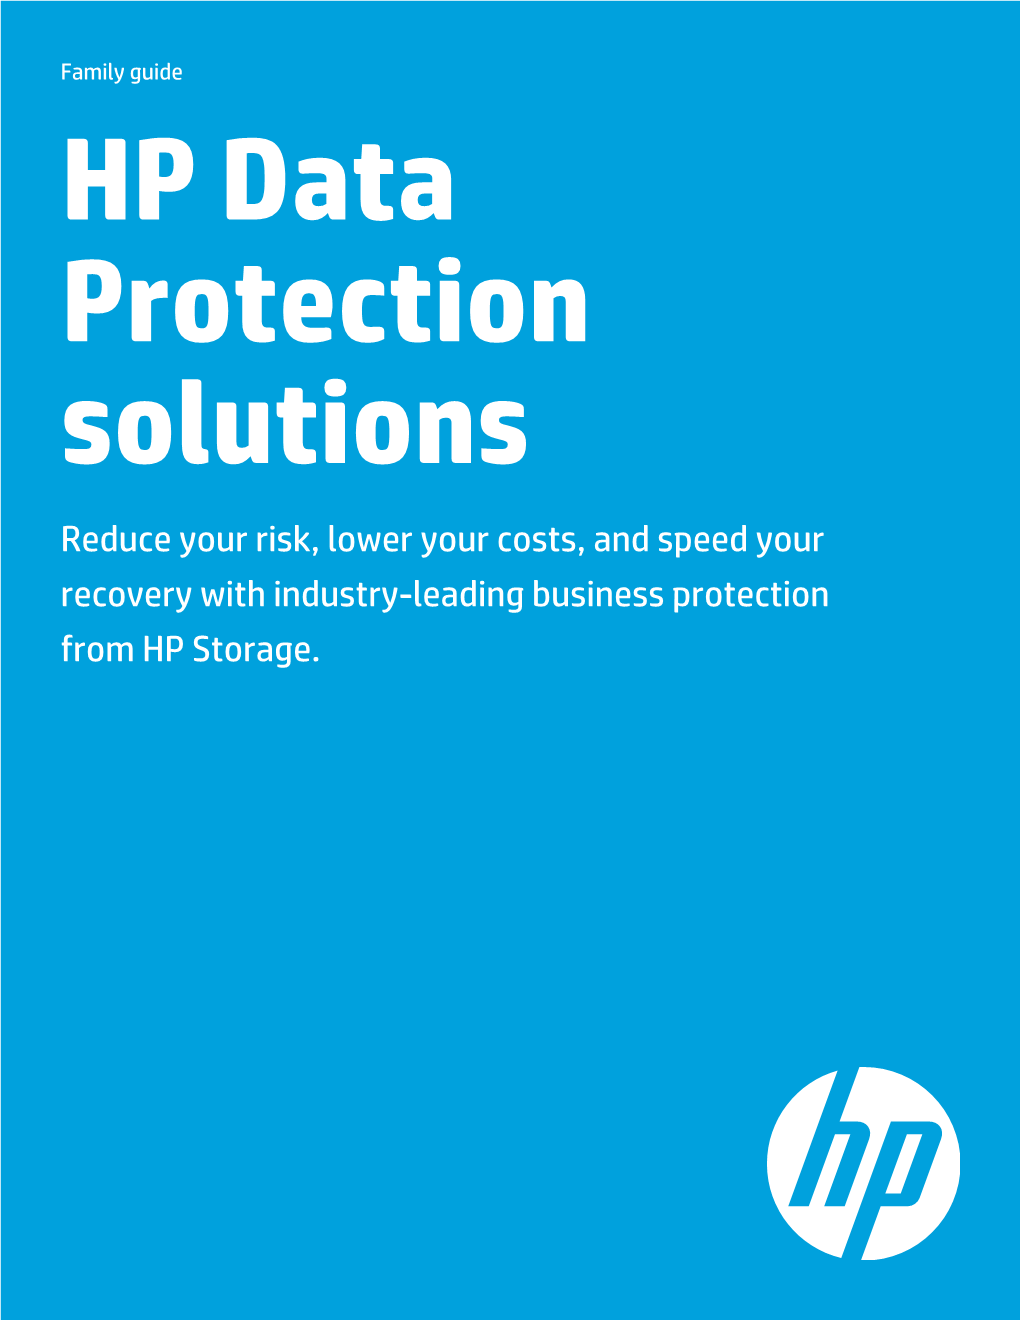 HP Data Protection Solutions Reduce Your Risk, Lower Your Costs, and Speed Your Recovery with Industry-Leading Business Protection from HP Storage